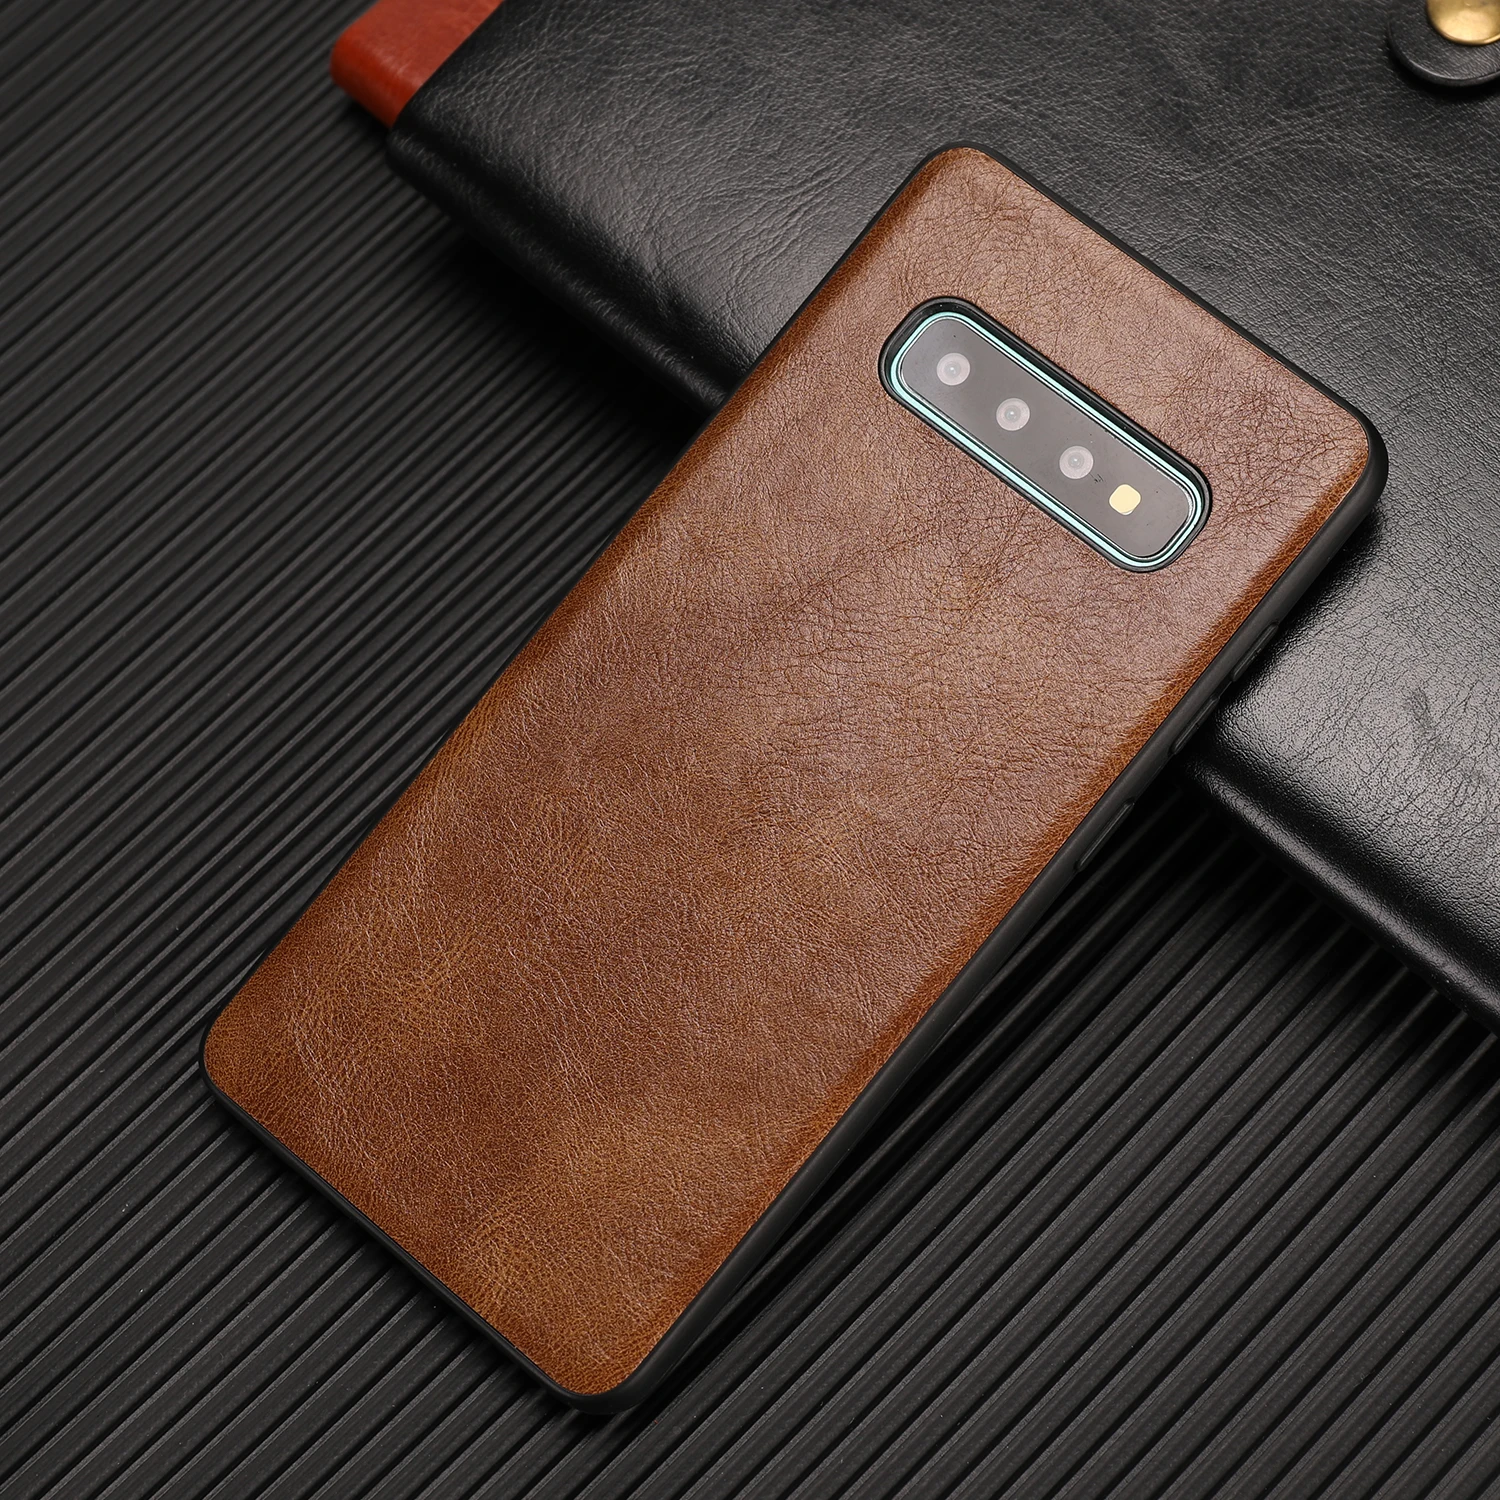 

Fashion Leather Cases For Samsuang Galaxy S10 S9 S8 Plus S10e Anti-knock Back Cover Coque Shell Dirt-resistant Shockproof Shells